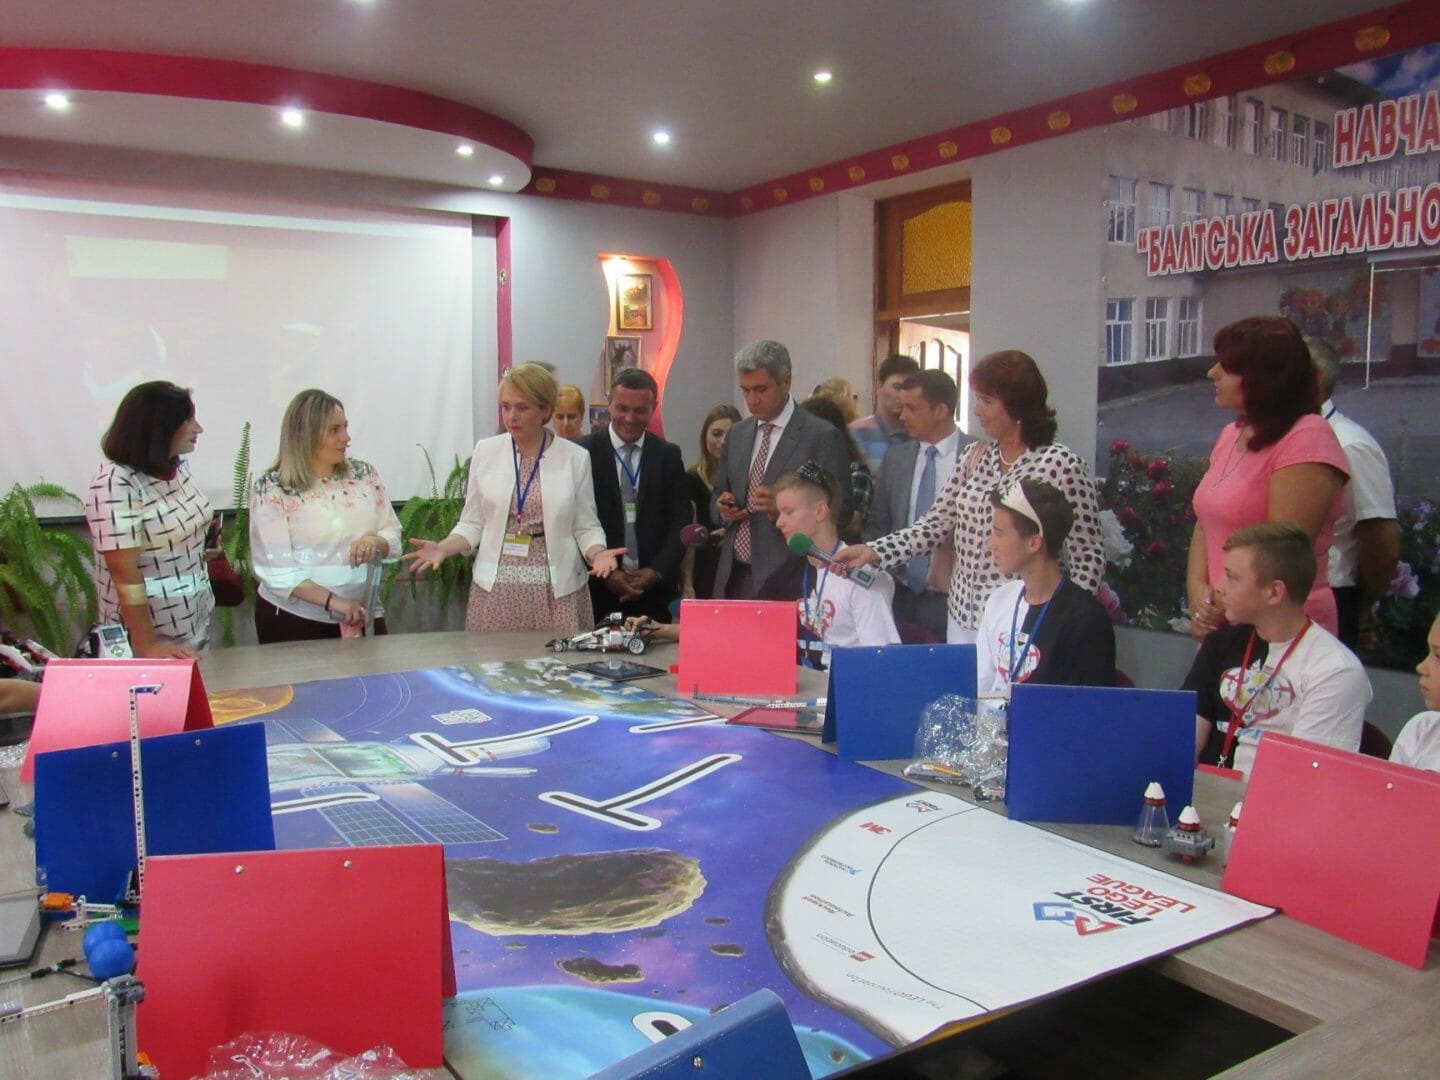 Liliya Hrynevych, Minister of Education of Ukraine, patronizes the educational process in the community. Students demonstrate skills in robotics. (2018) 